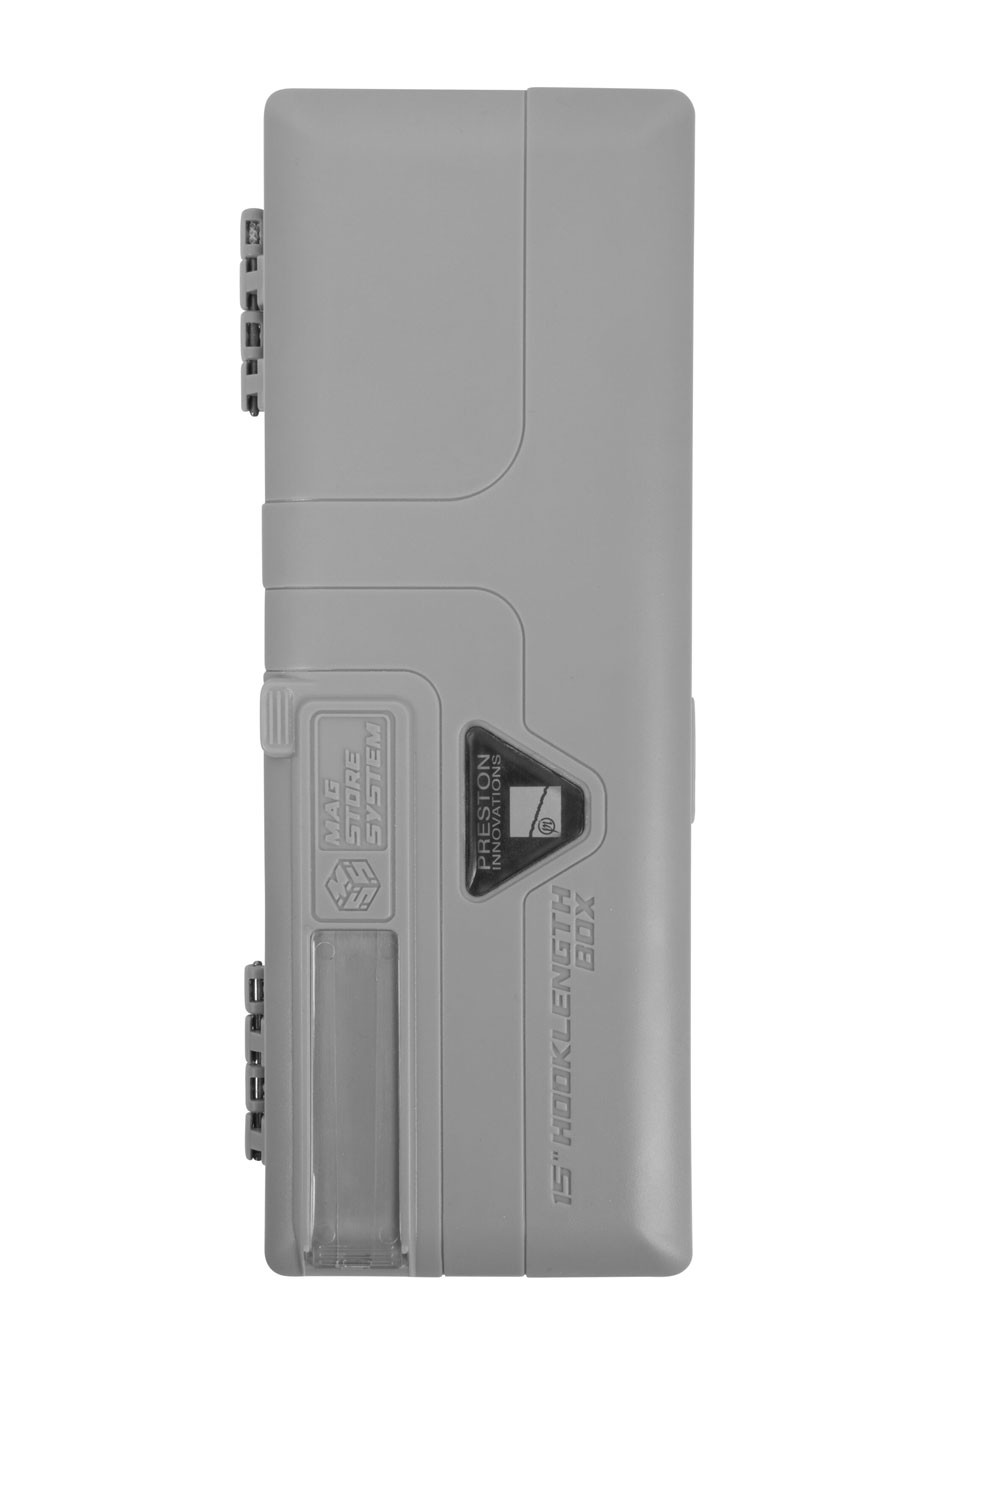 Image of Unloaded Mag Store System 30 & 38cm Unloaded  by  Innovations